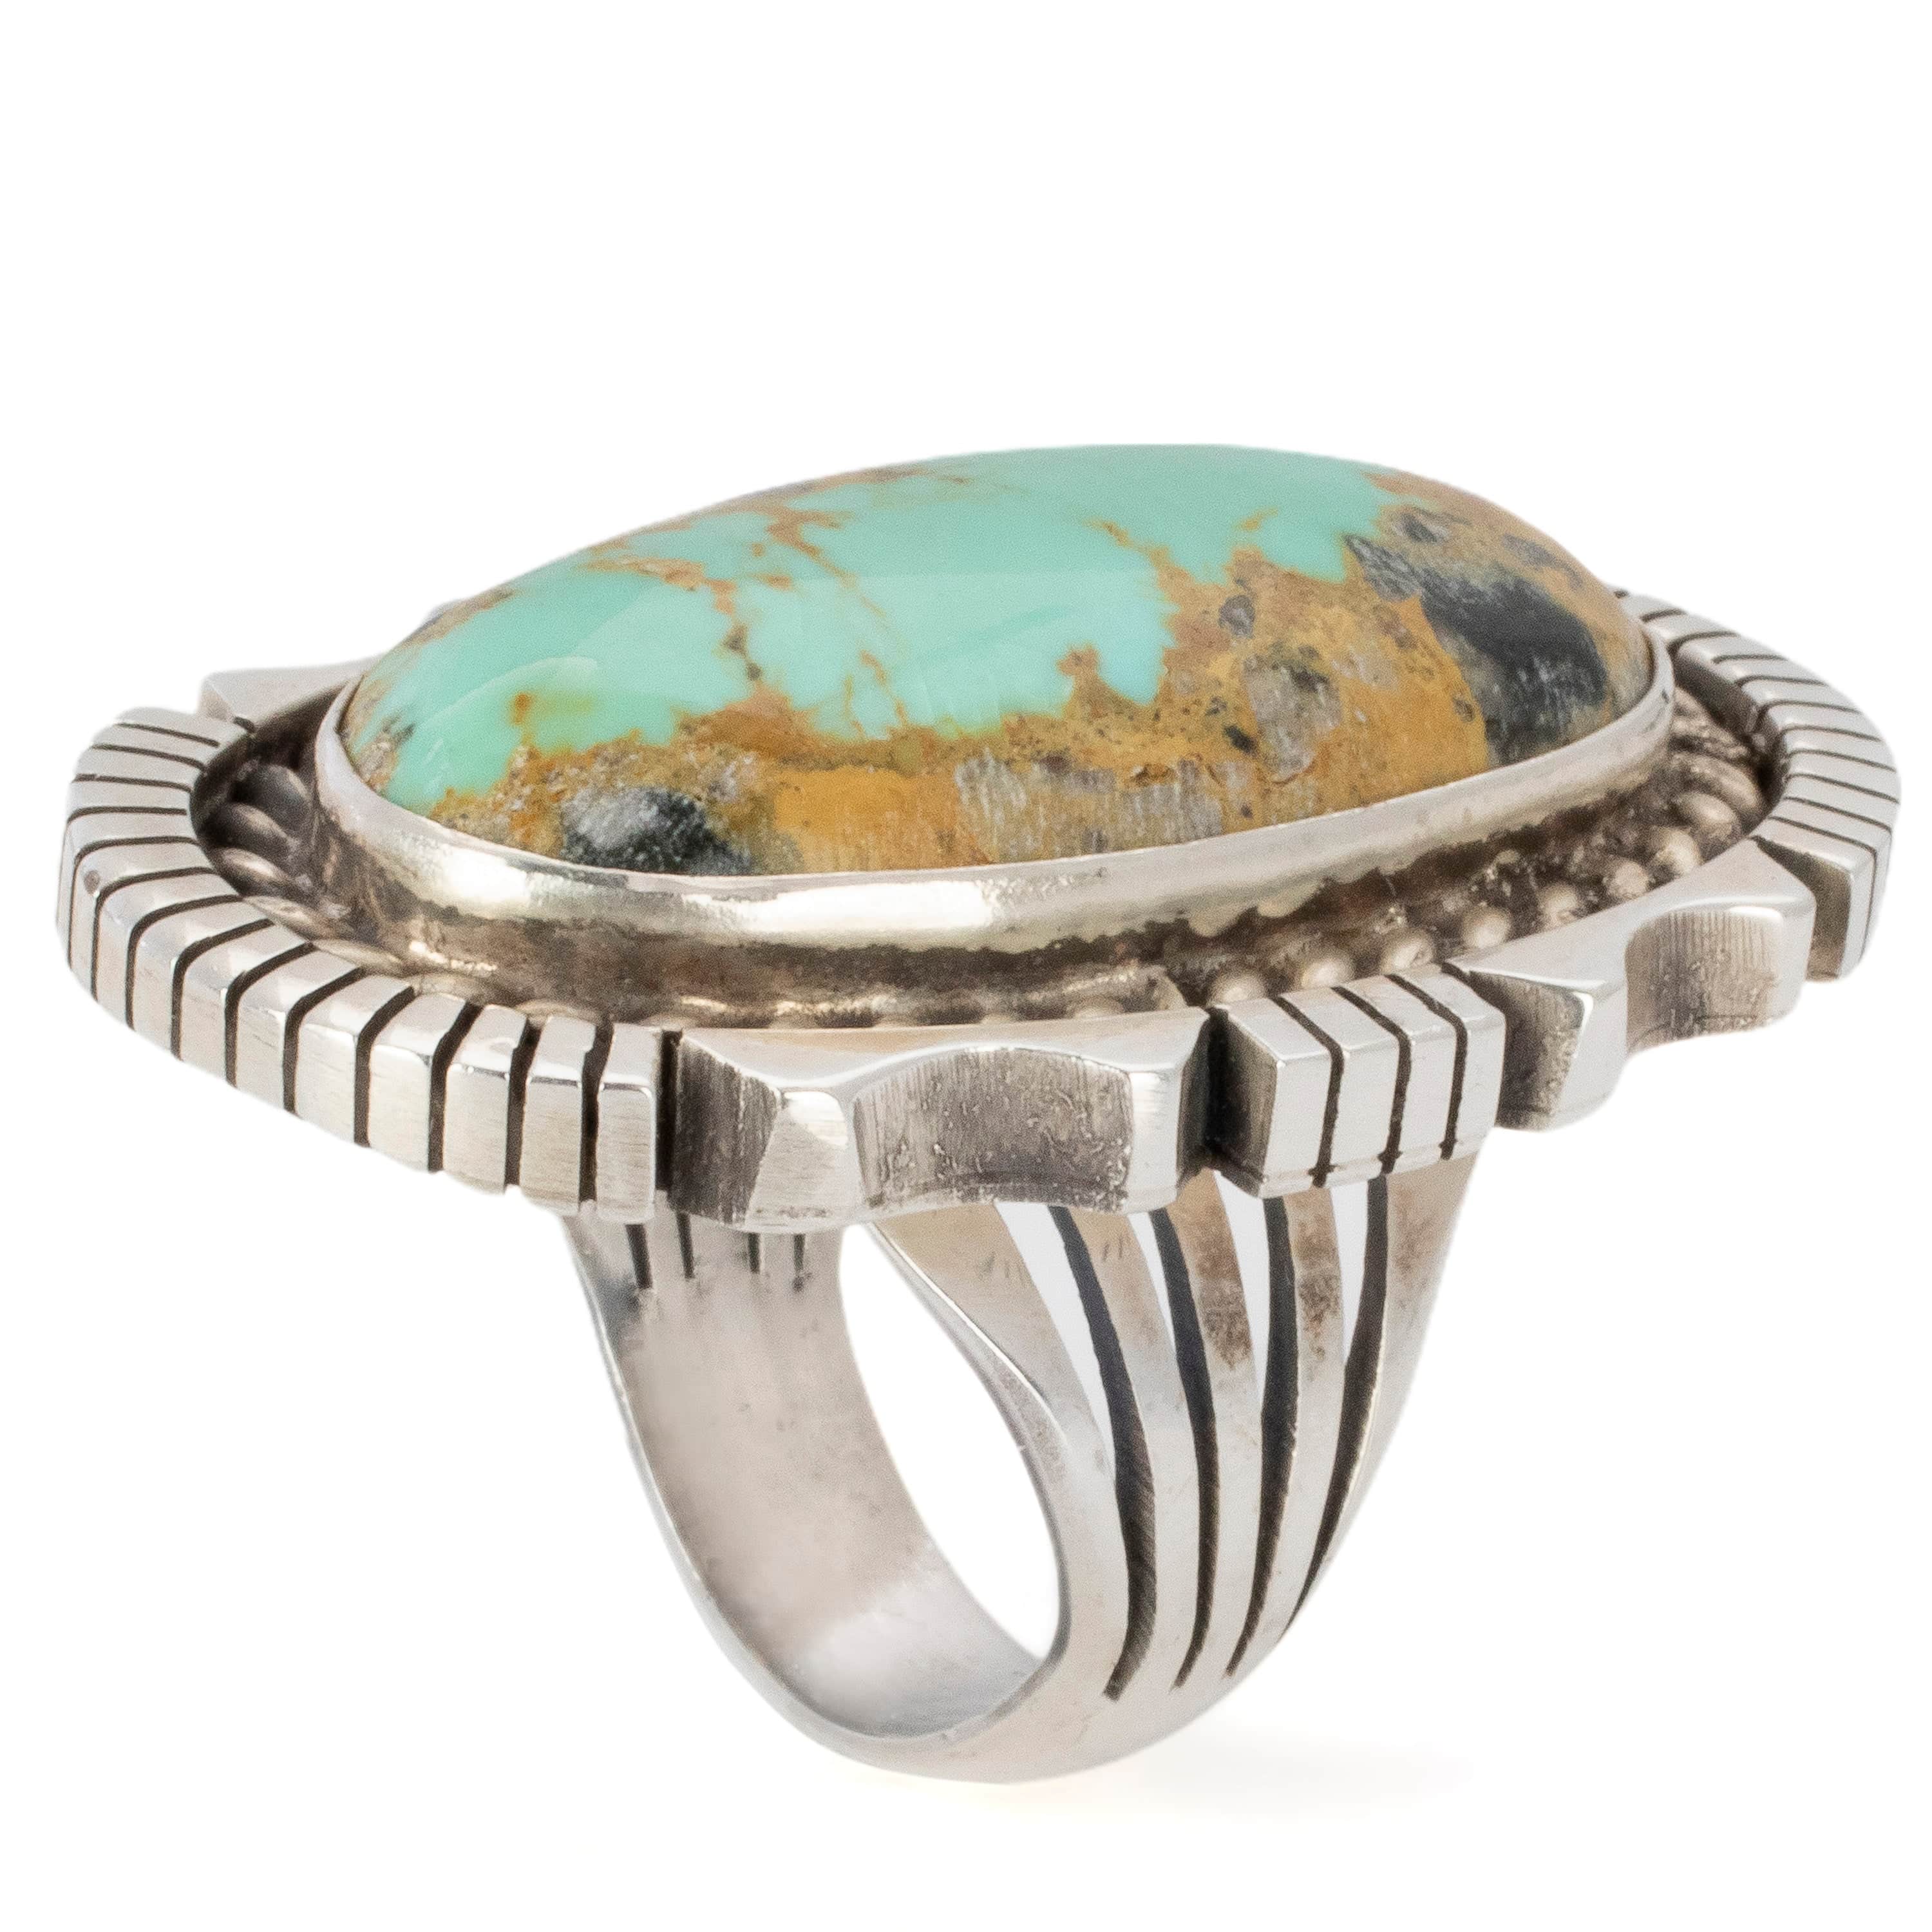 Kalifano Native American Jewelry 6 Eddie Secatero Navajo Tyrone Turquoise USA Native American Made 925 Sterling Silver Ring NAR1200.052.6